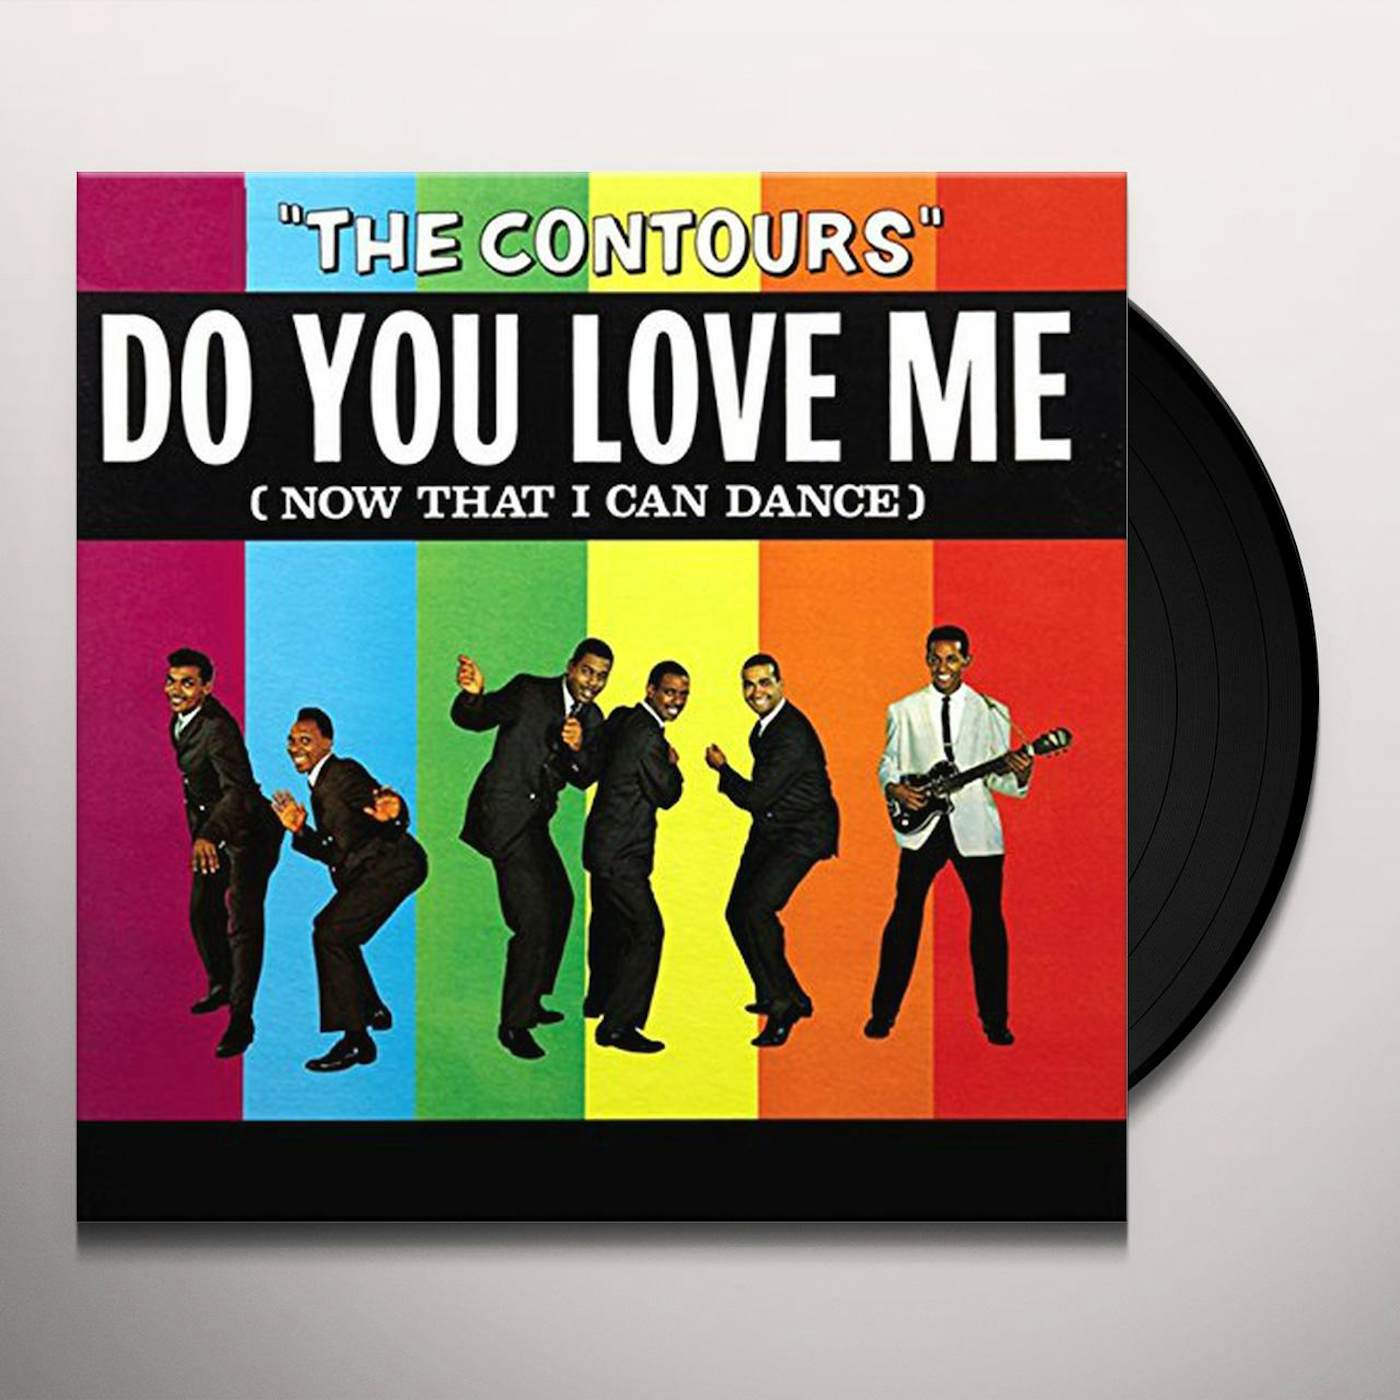 Do You Love Me (Now That I Can Dance) - Wikipedia